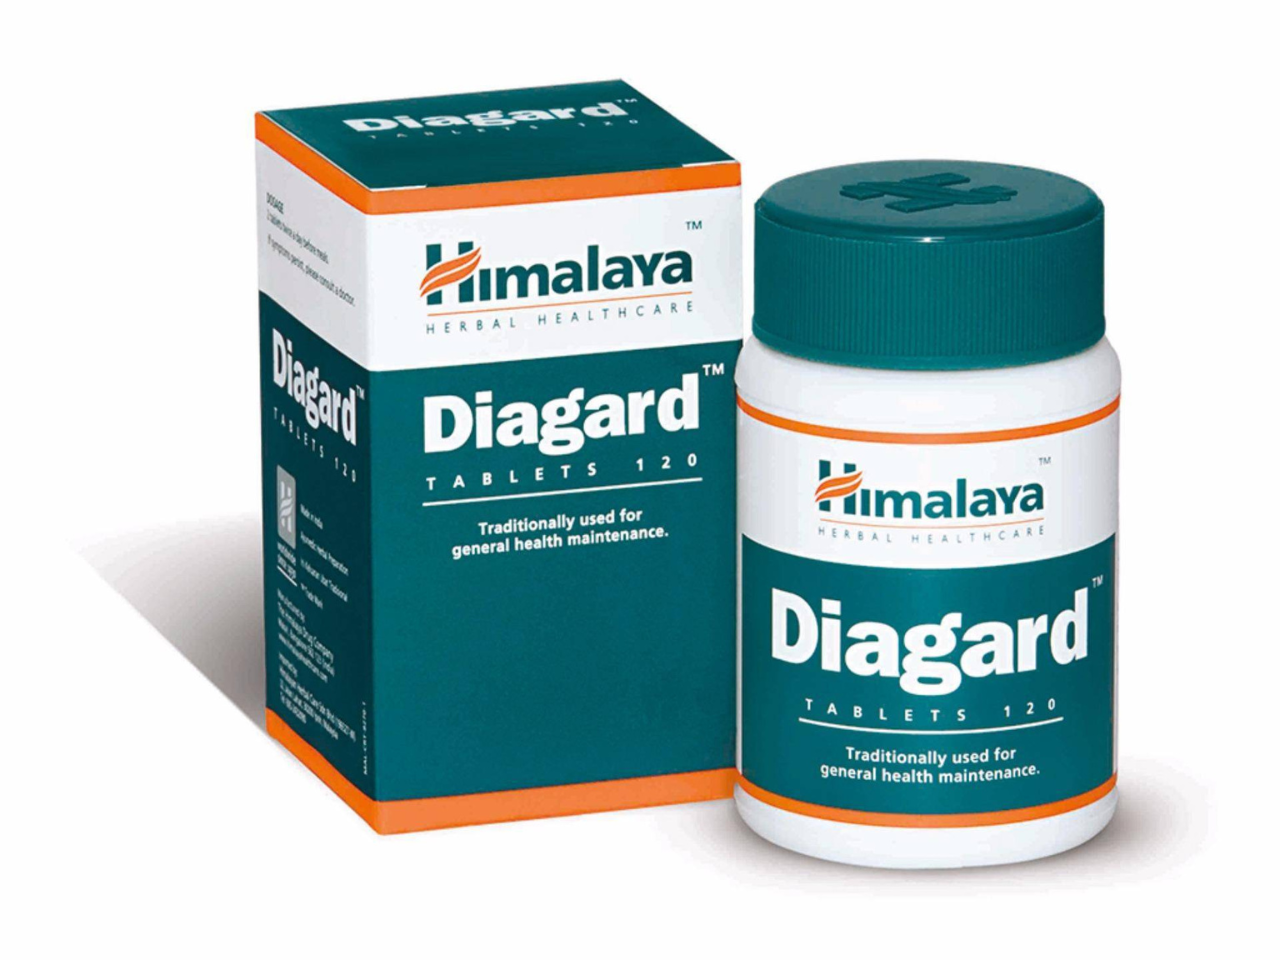 HIMALAYA Diagard, herbal supplement to combat diabetes, available at SM Health Care Sdn Bhd. Product placed against white background.